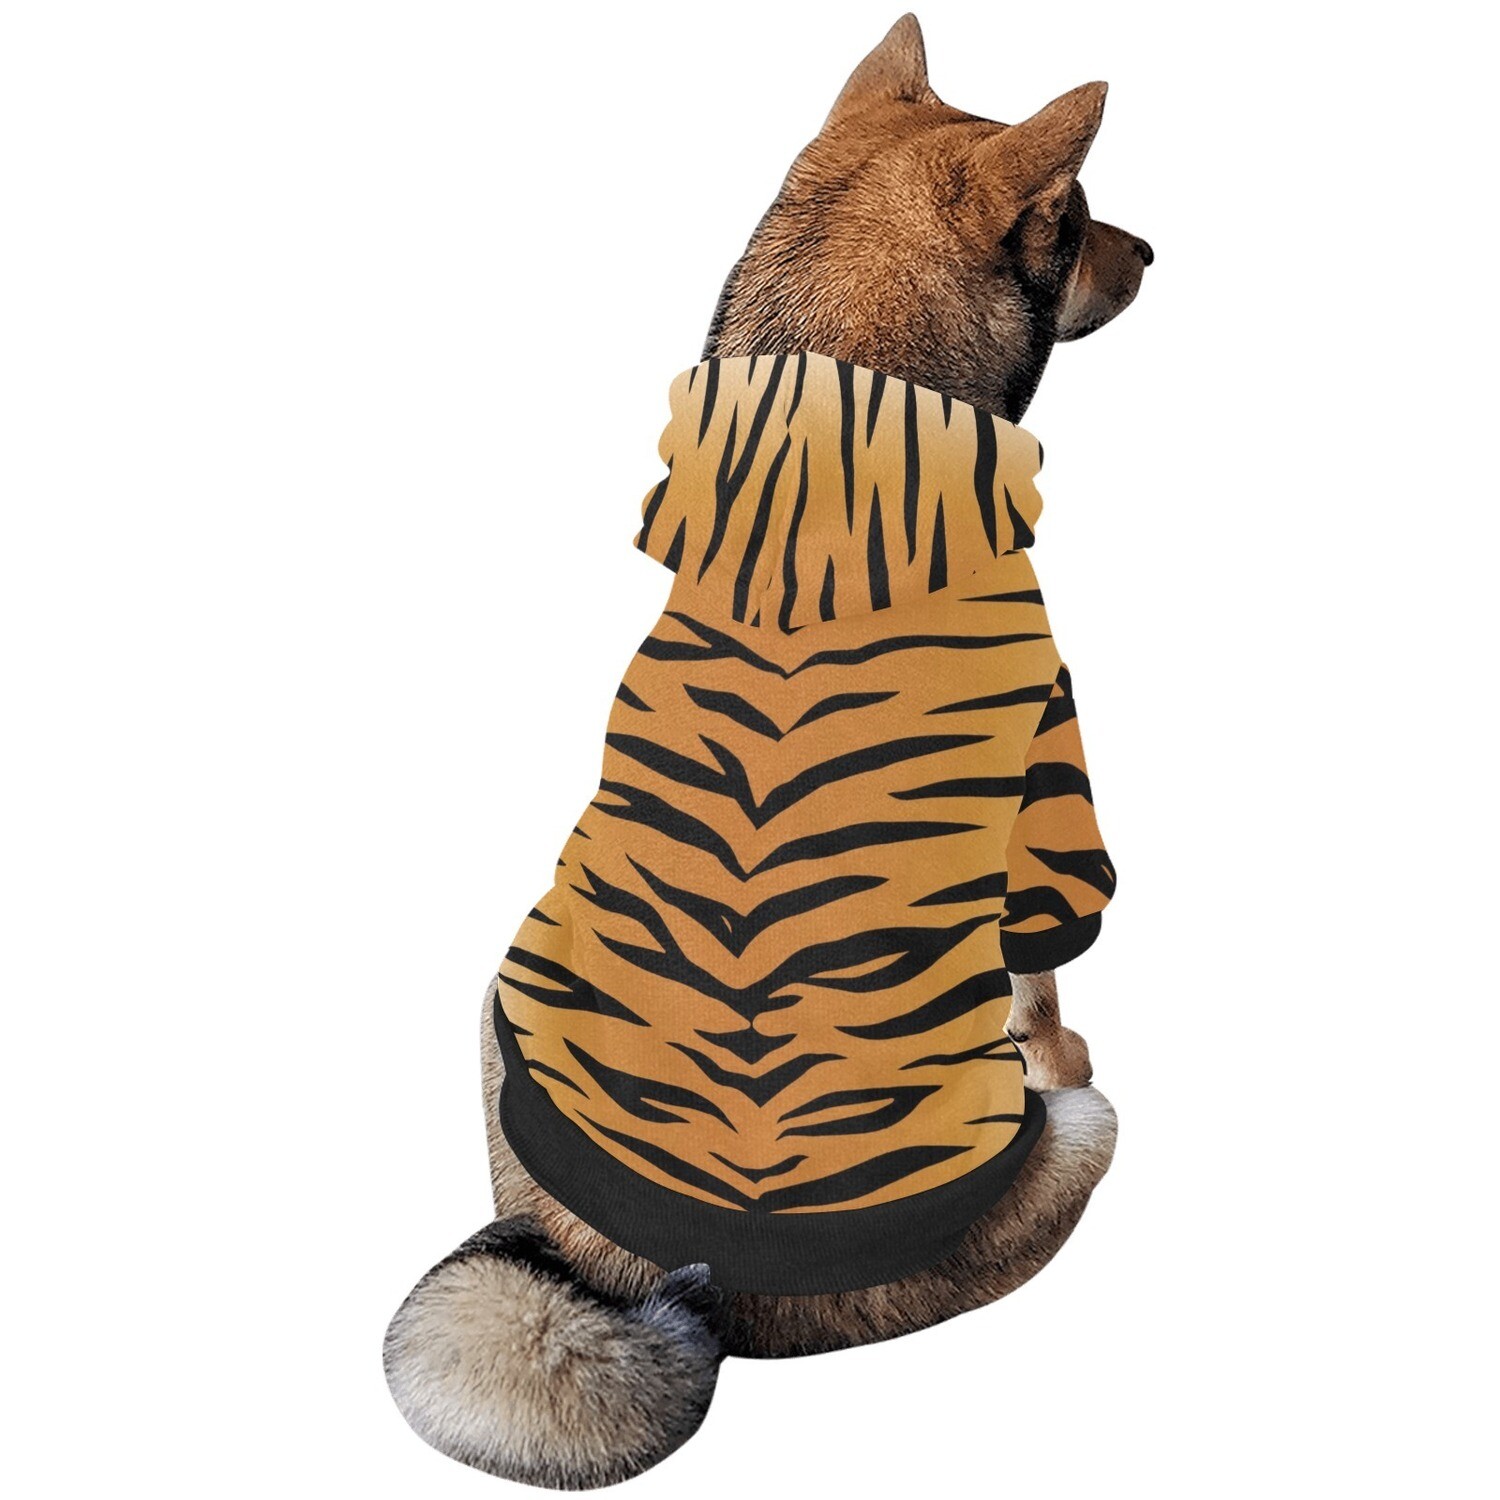 🐕🐅 Dog hoodie Tiger print, Tigers, fuzzy warm buttoned dog hooded sweatshirt, dog hooded sweater, Dog clothes, Dog clothing, Dog apparel, Gift for dogs, Halloween